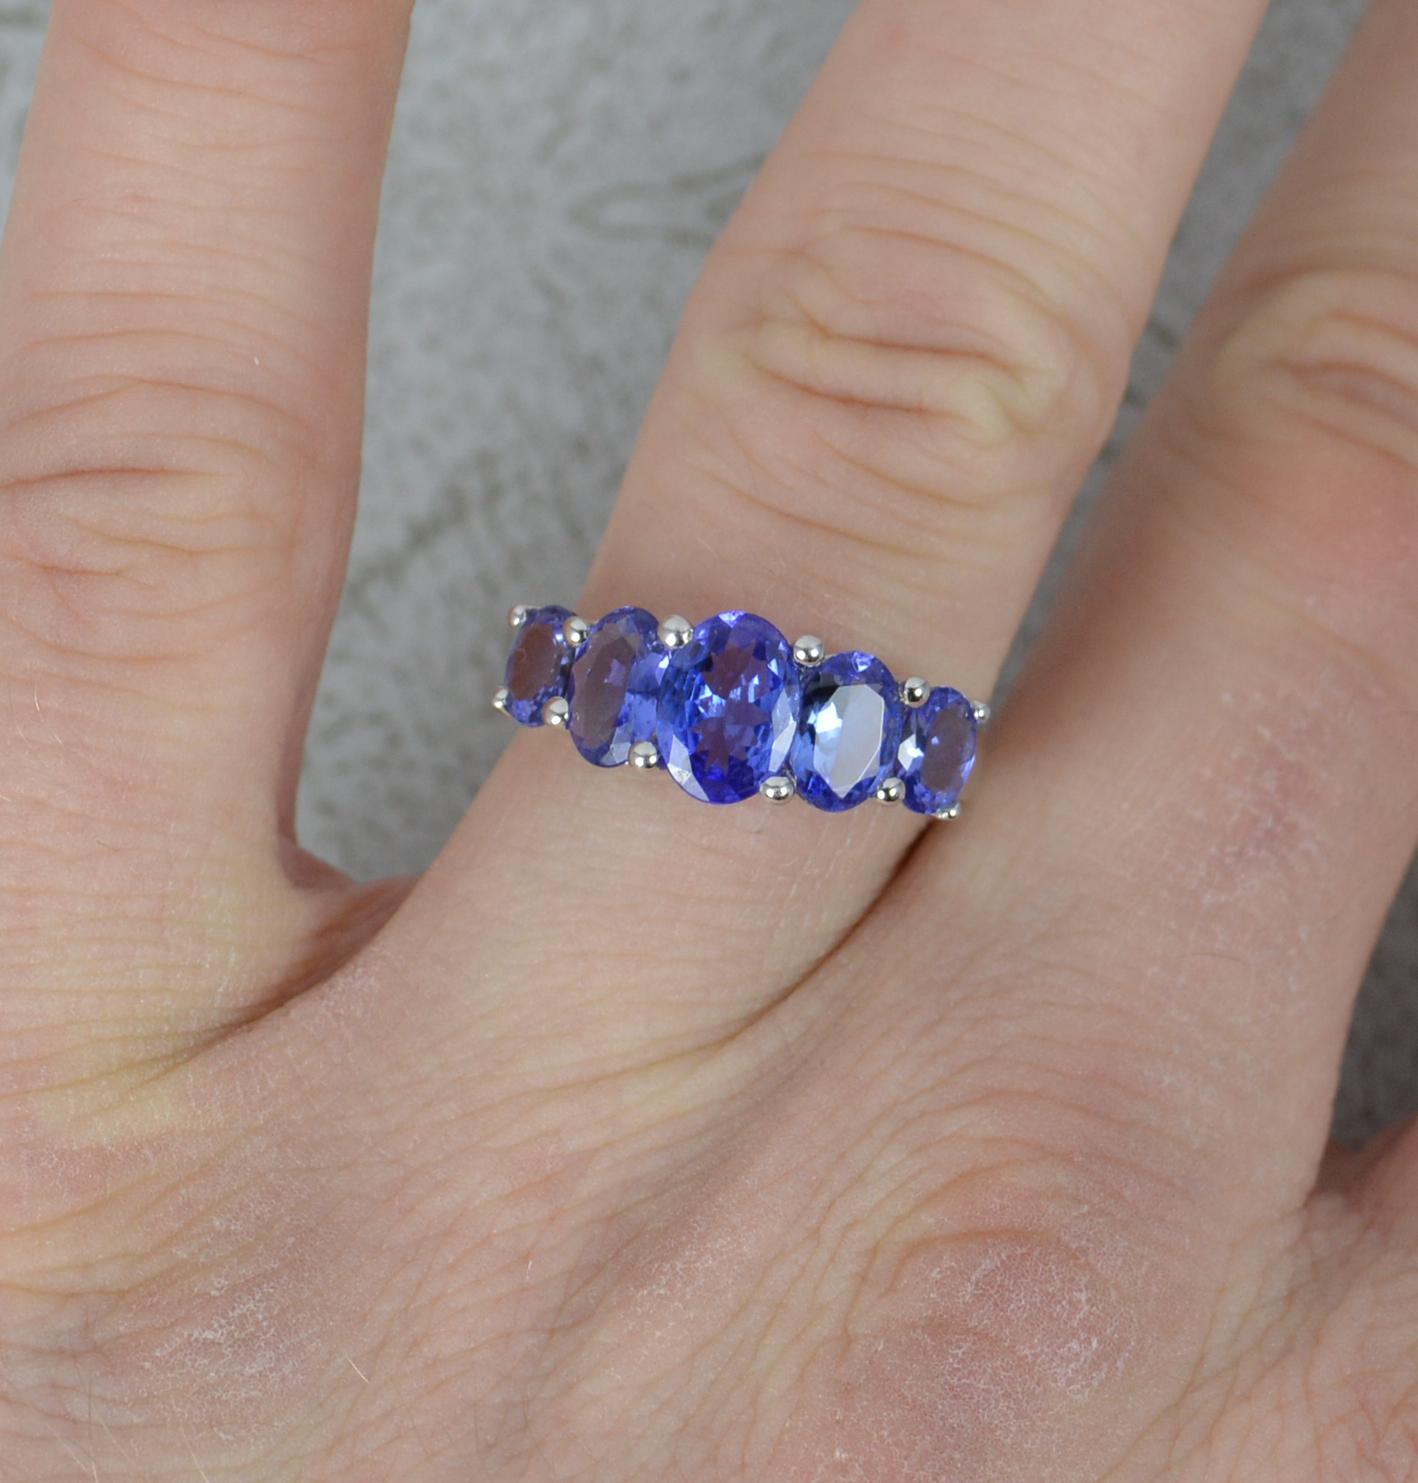 A superb ladies tanzanite ring.
Solid 14 carat white gold example.
Set with five oval cut, graduated size, blue coloured tanzanite stones.
20mm spread of stones. Protruding 5.5mm off the finger.
CONDITION ; Excellent. Well set stones. Strong, solid